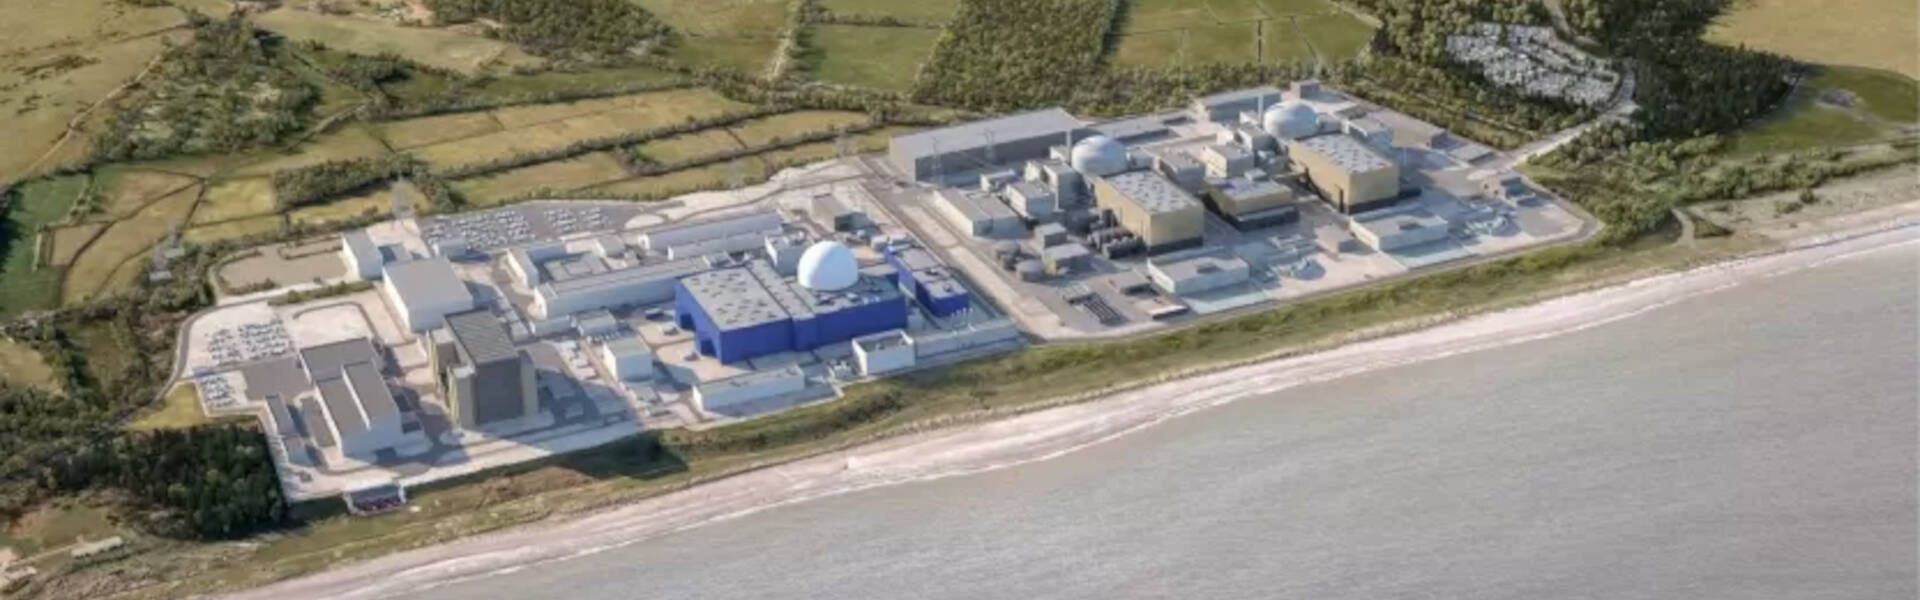 Sizewell C to face higher construction penalties to protect consumers from delays